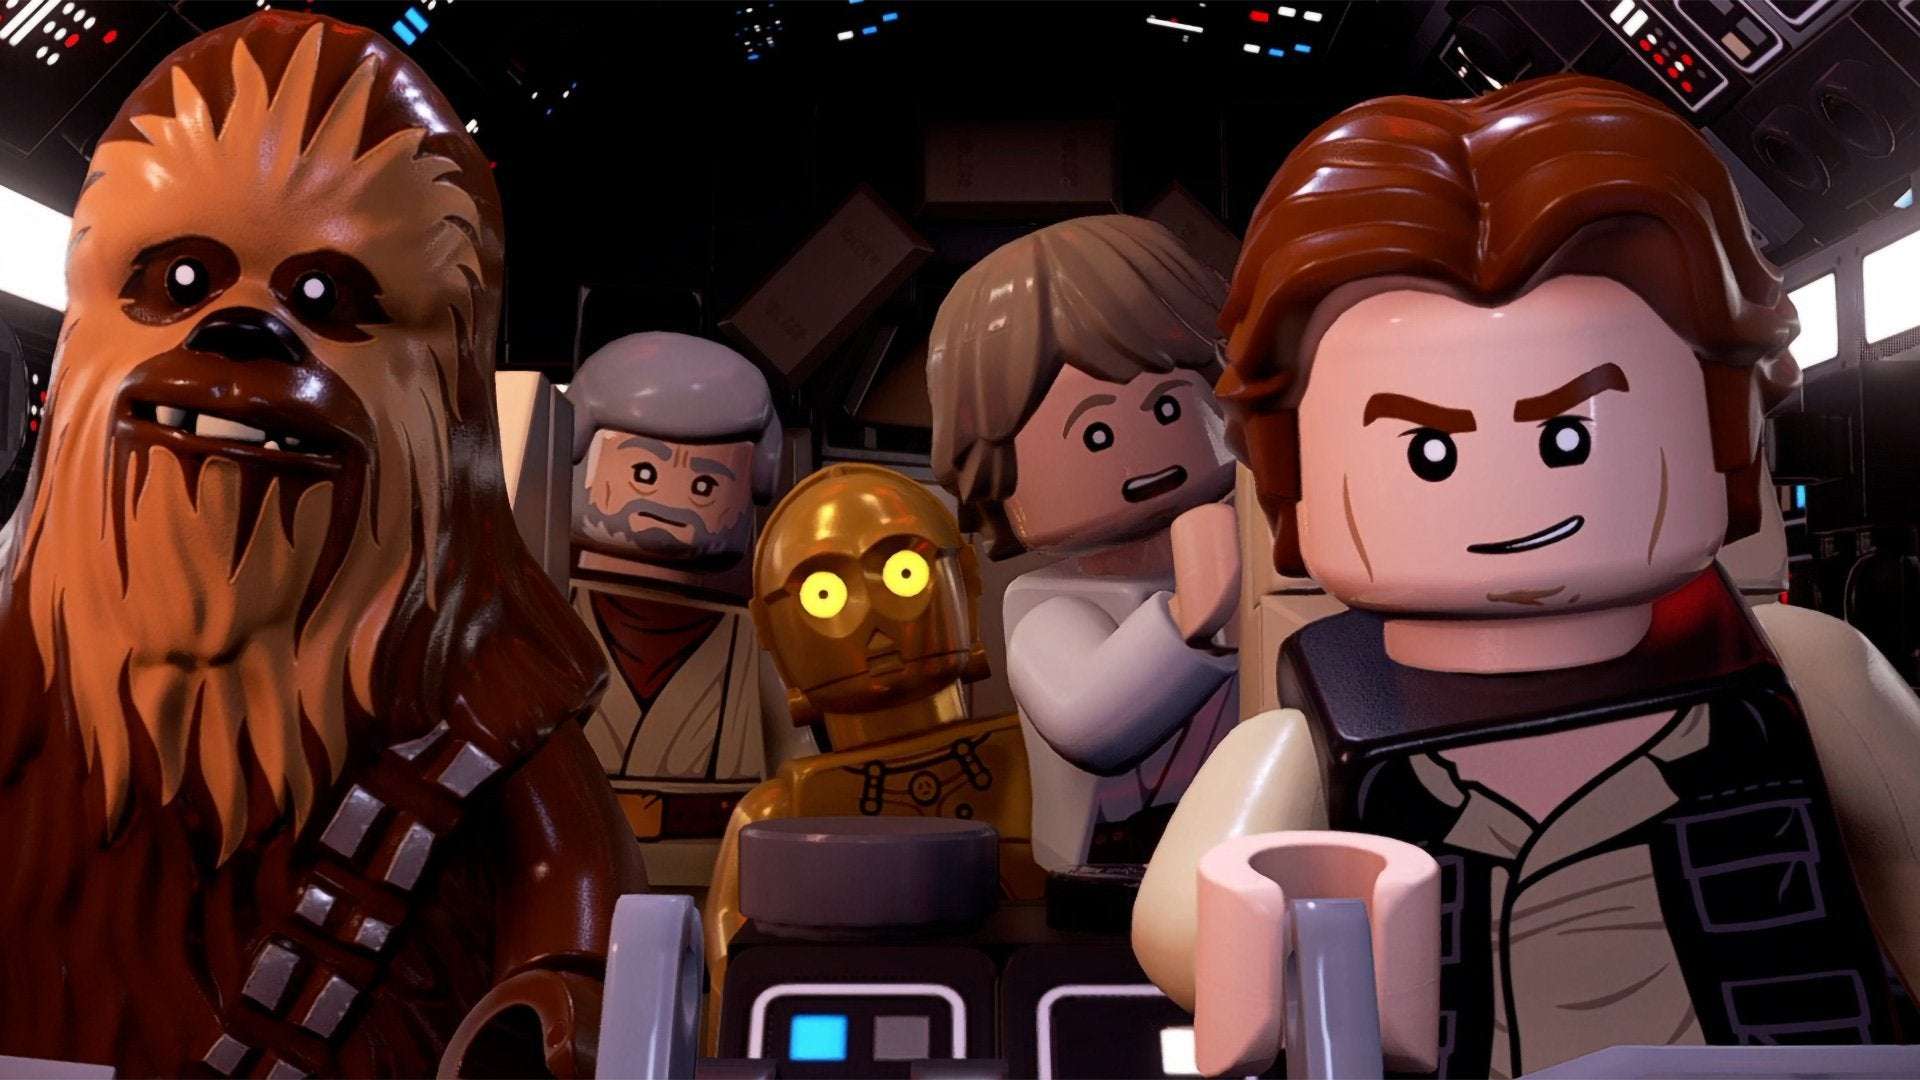 image for The Skywalker Saga has smashed Lego’s Steam user record by 1200%